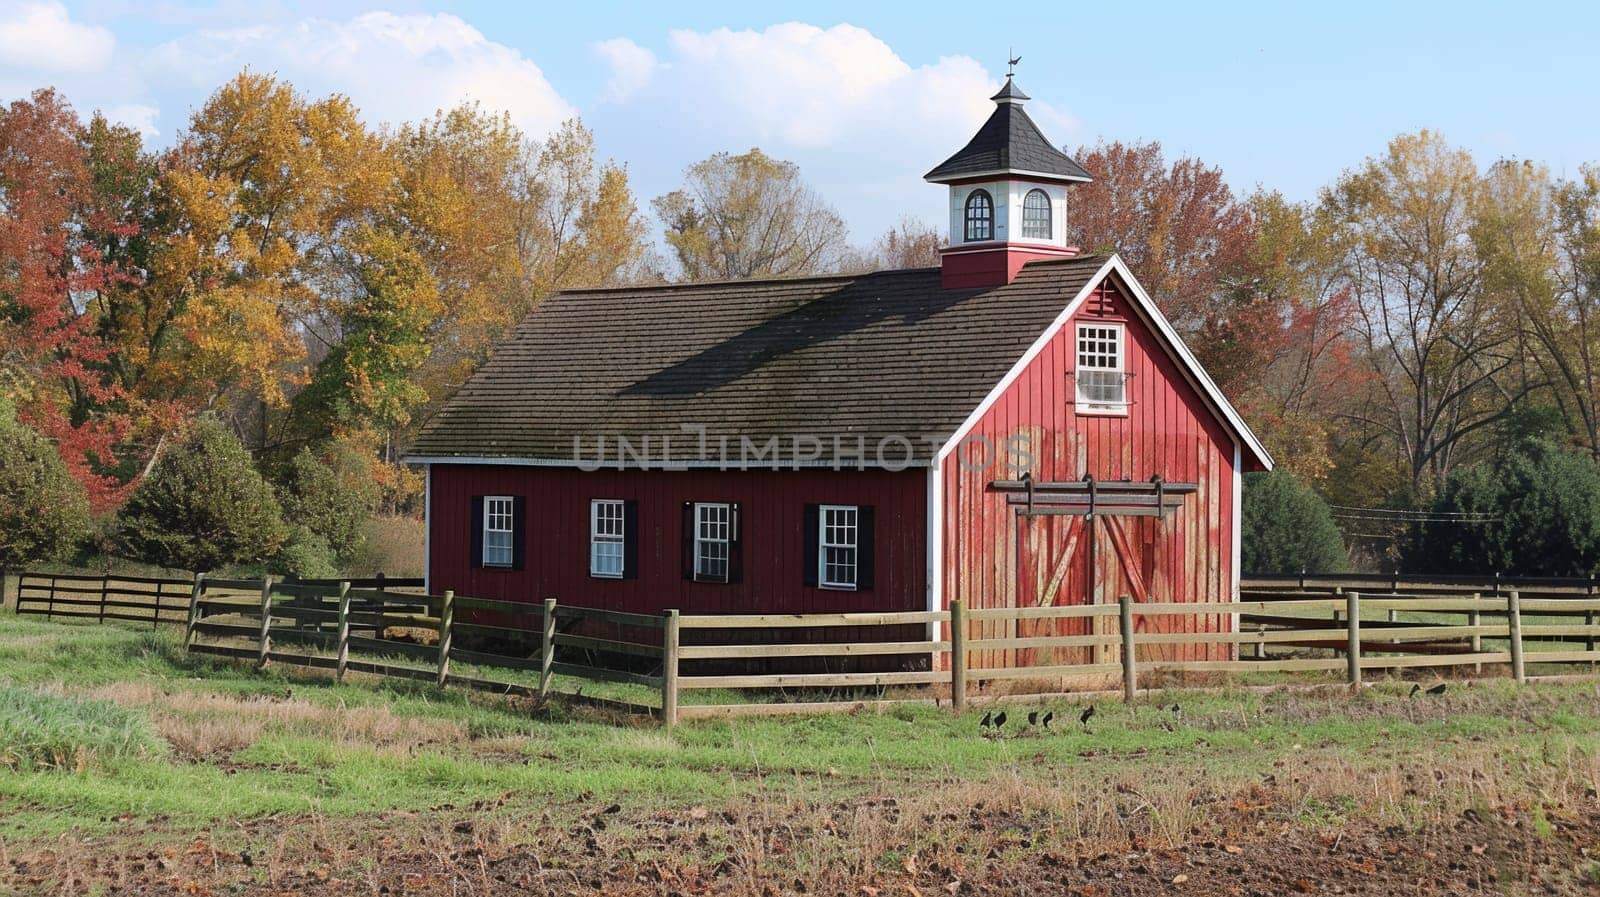 A small red barn with a steeple in the middle of an open field